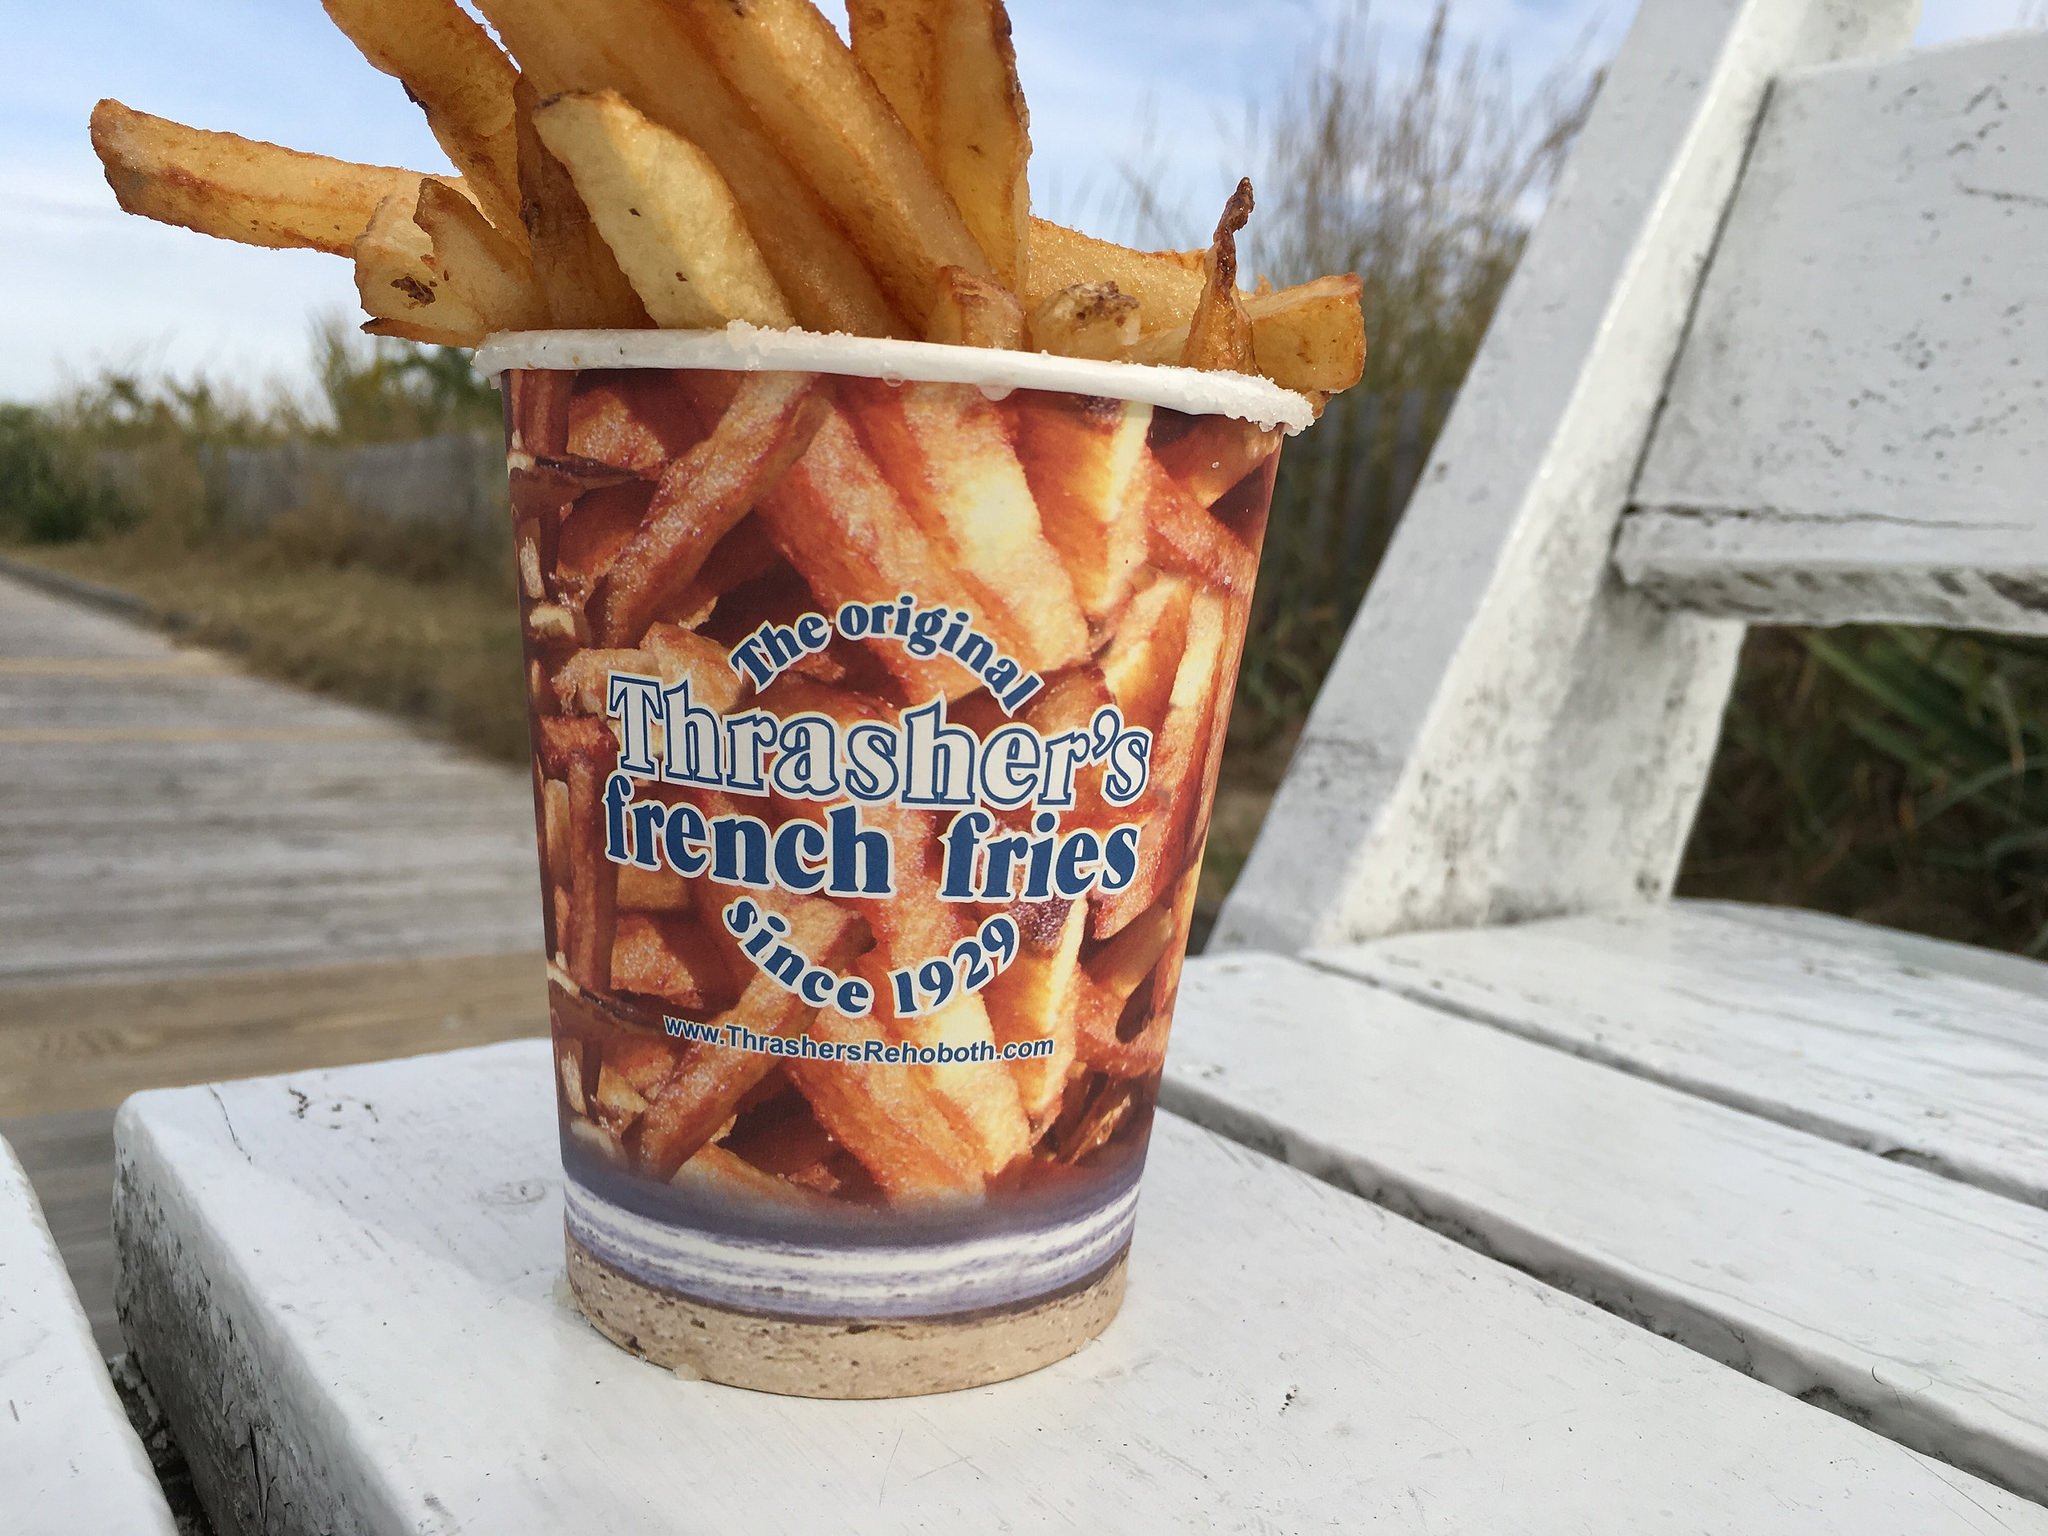 Fries from Thrasher's. Photograph by Michele Dorsey Walfred from Flickr Creative Commons.